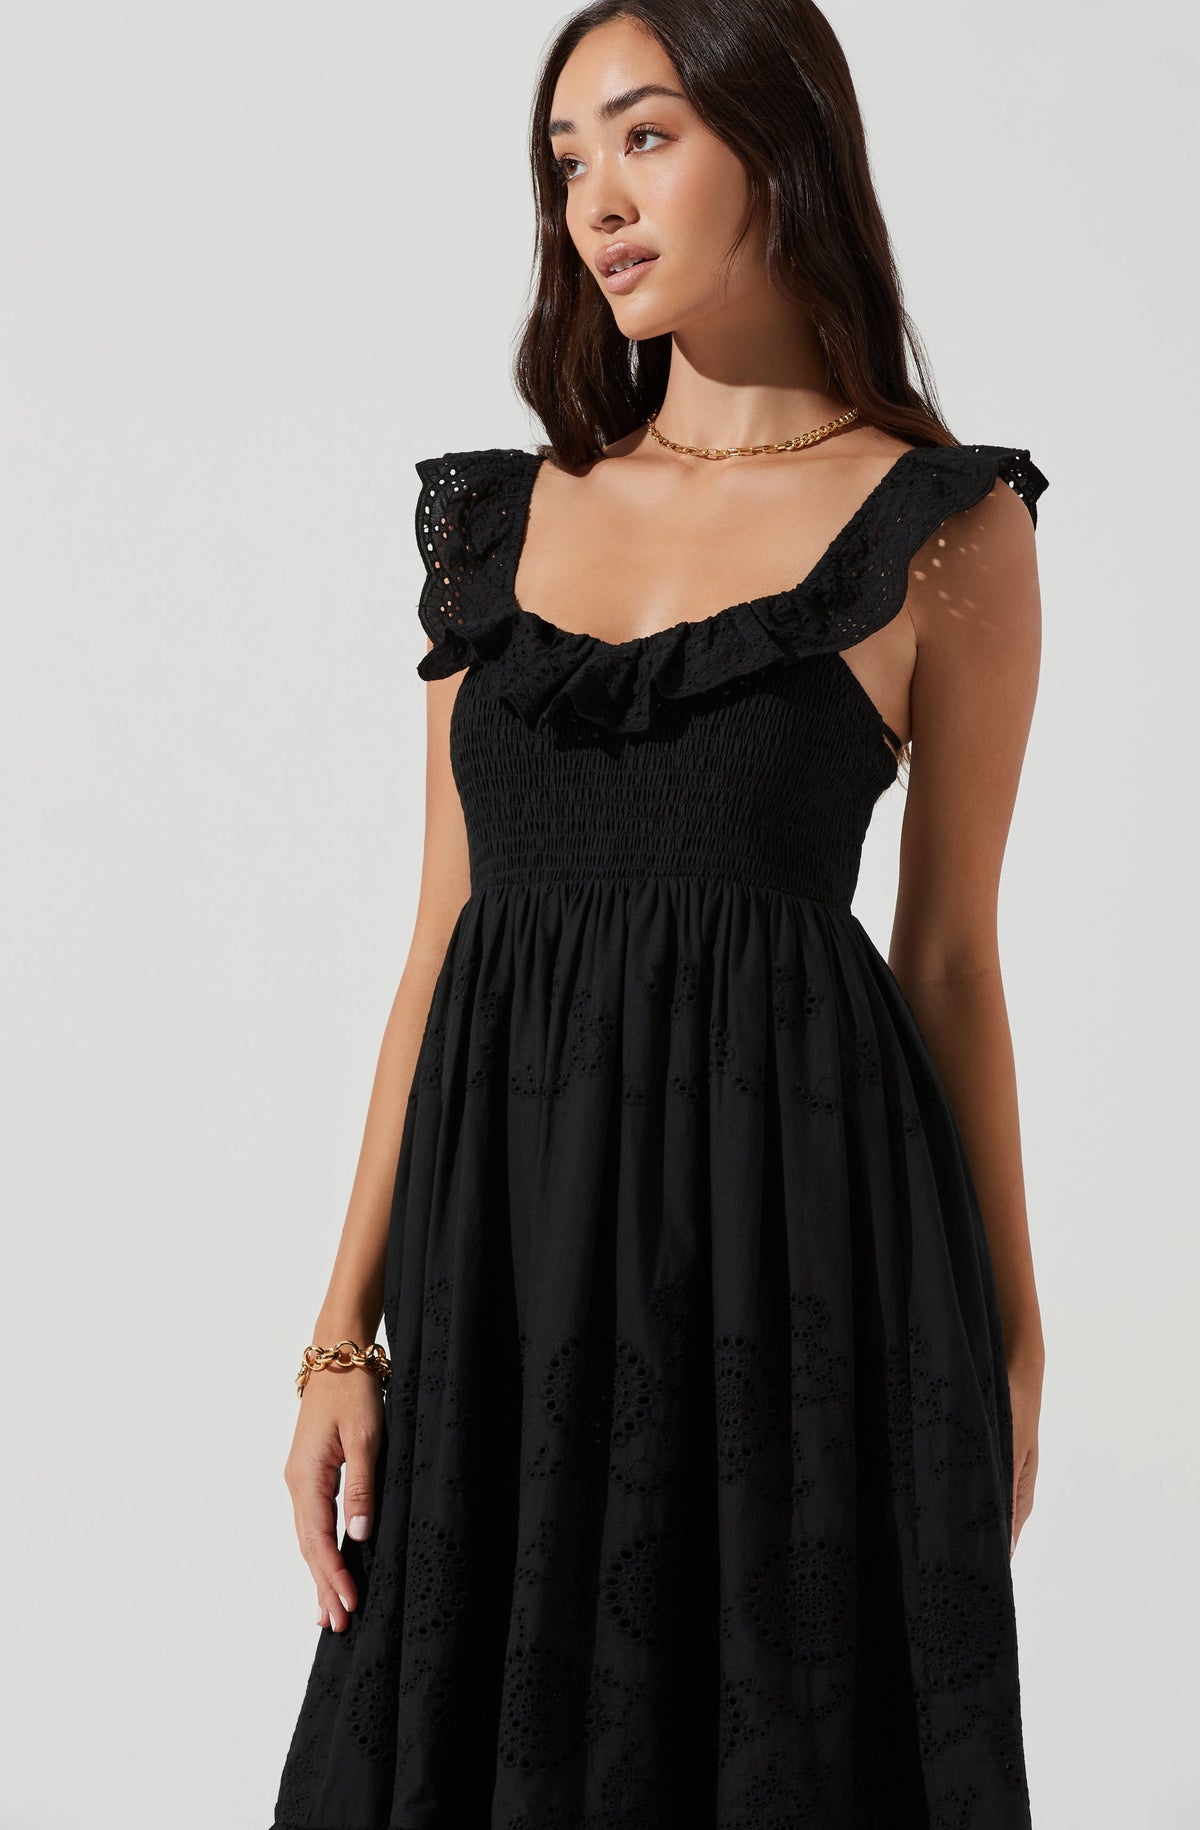 Black embroidered ruffled dress by Athira Designs